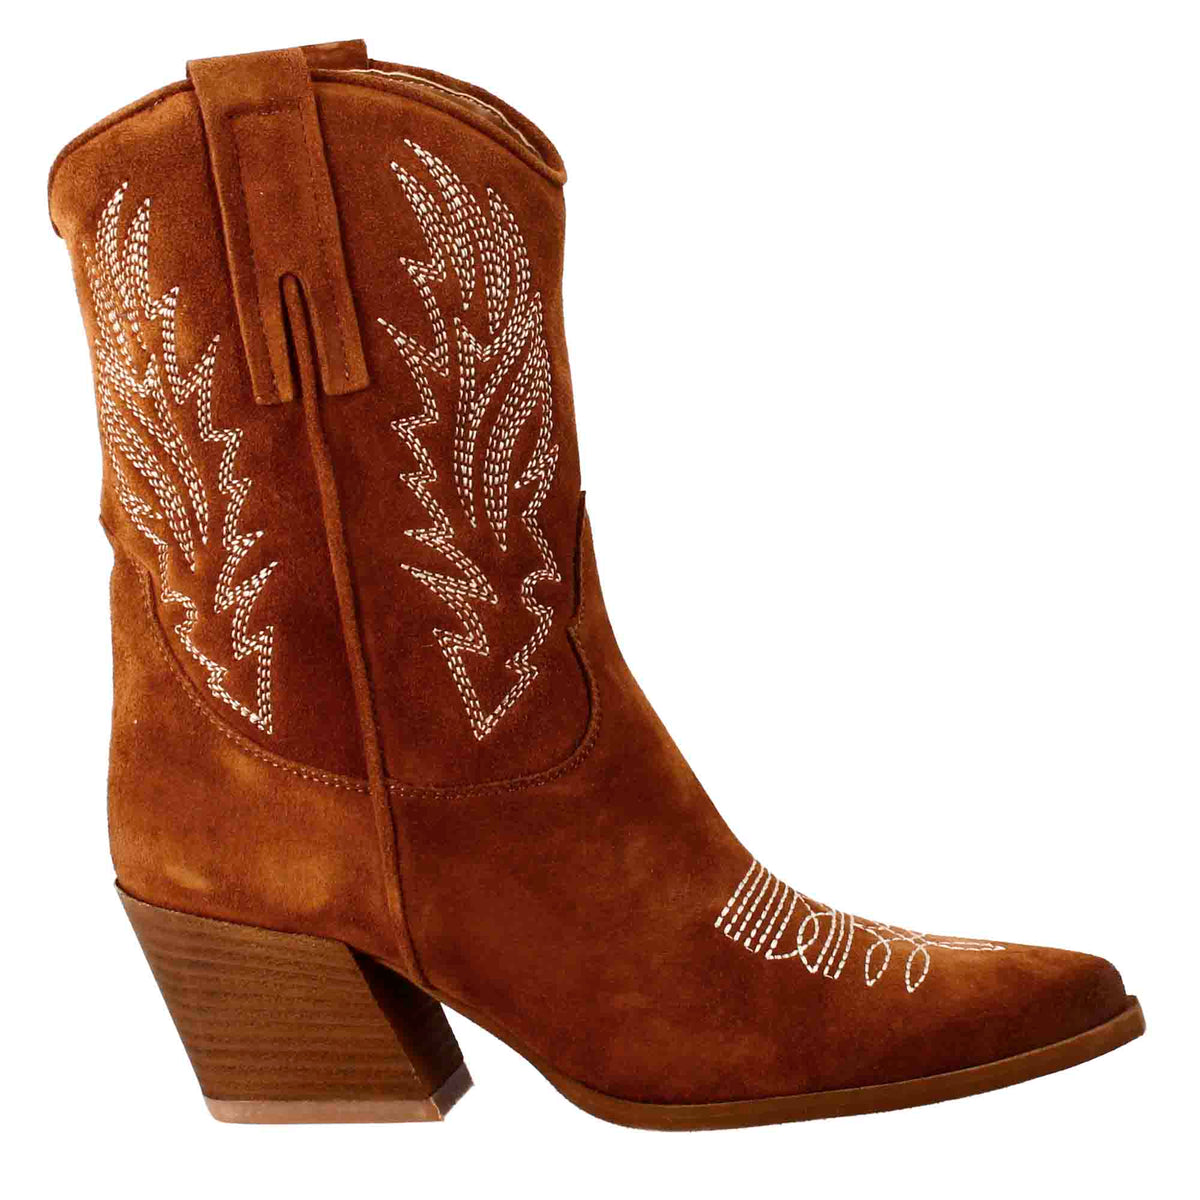 Low women's Texan boots in burnt brown suede with embroidery.